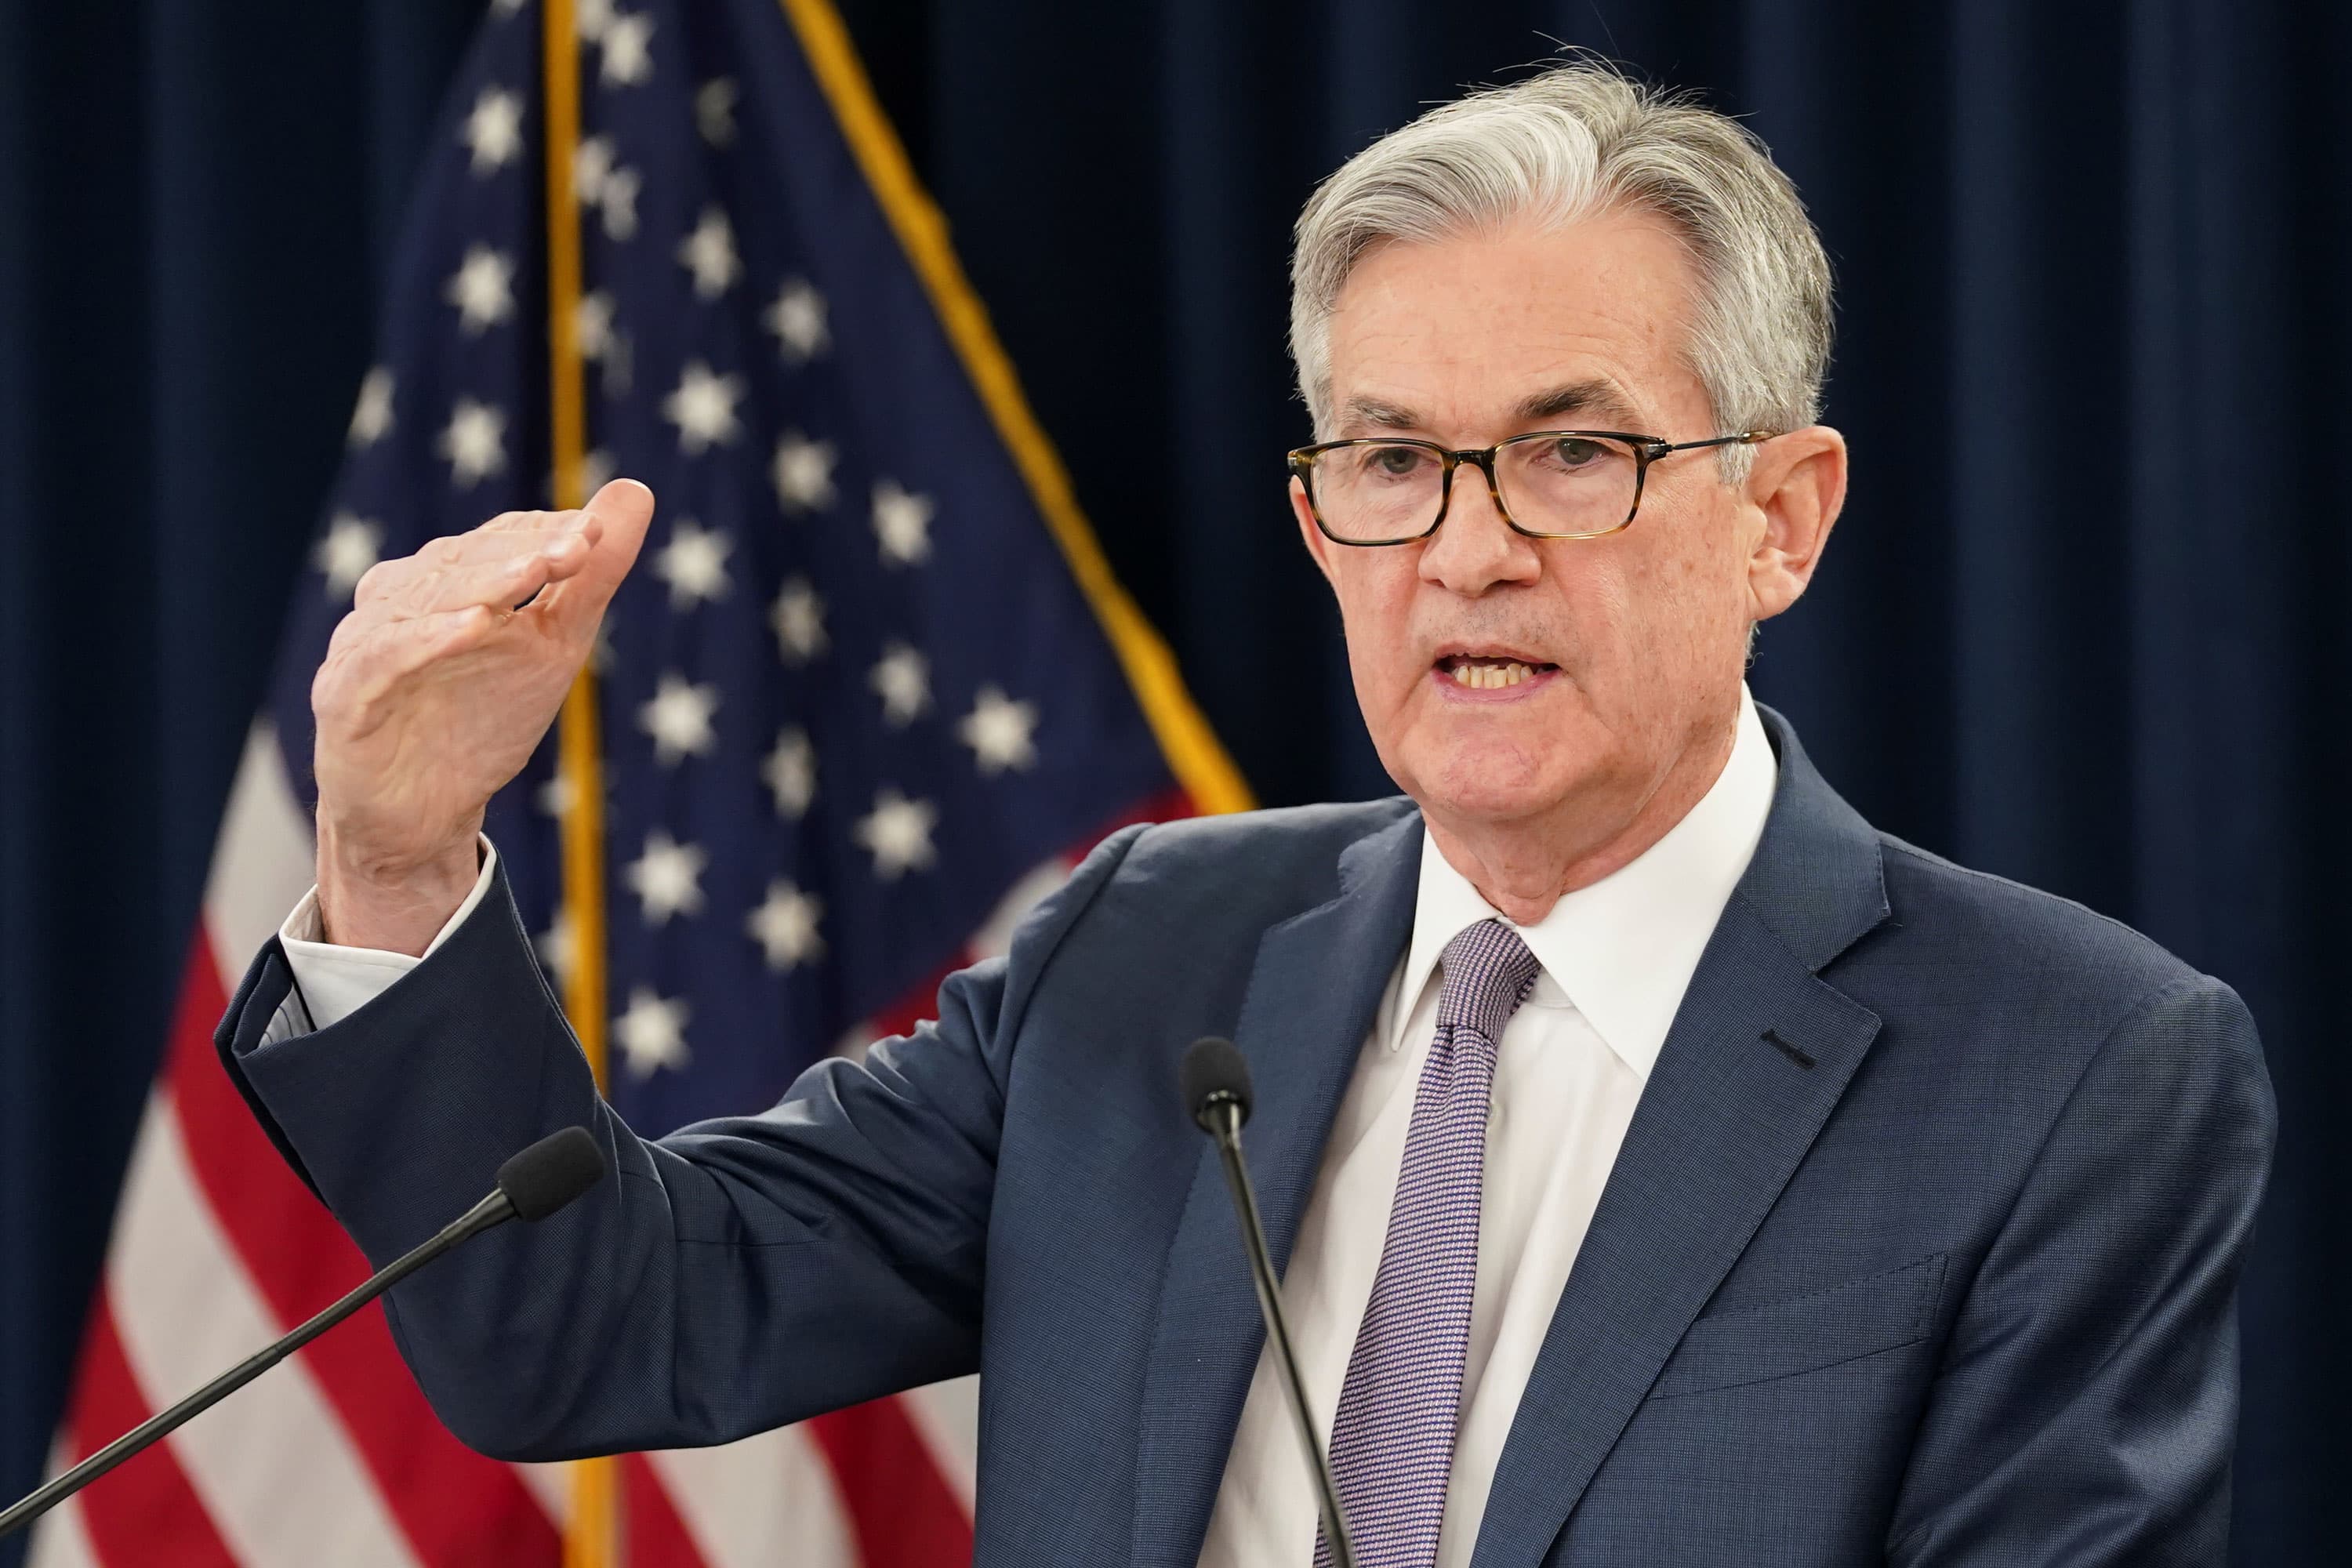 Fed Chairman Powell is a ‘maestro’, calming markets and preventing chaos